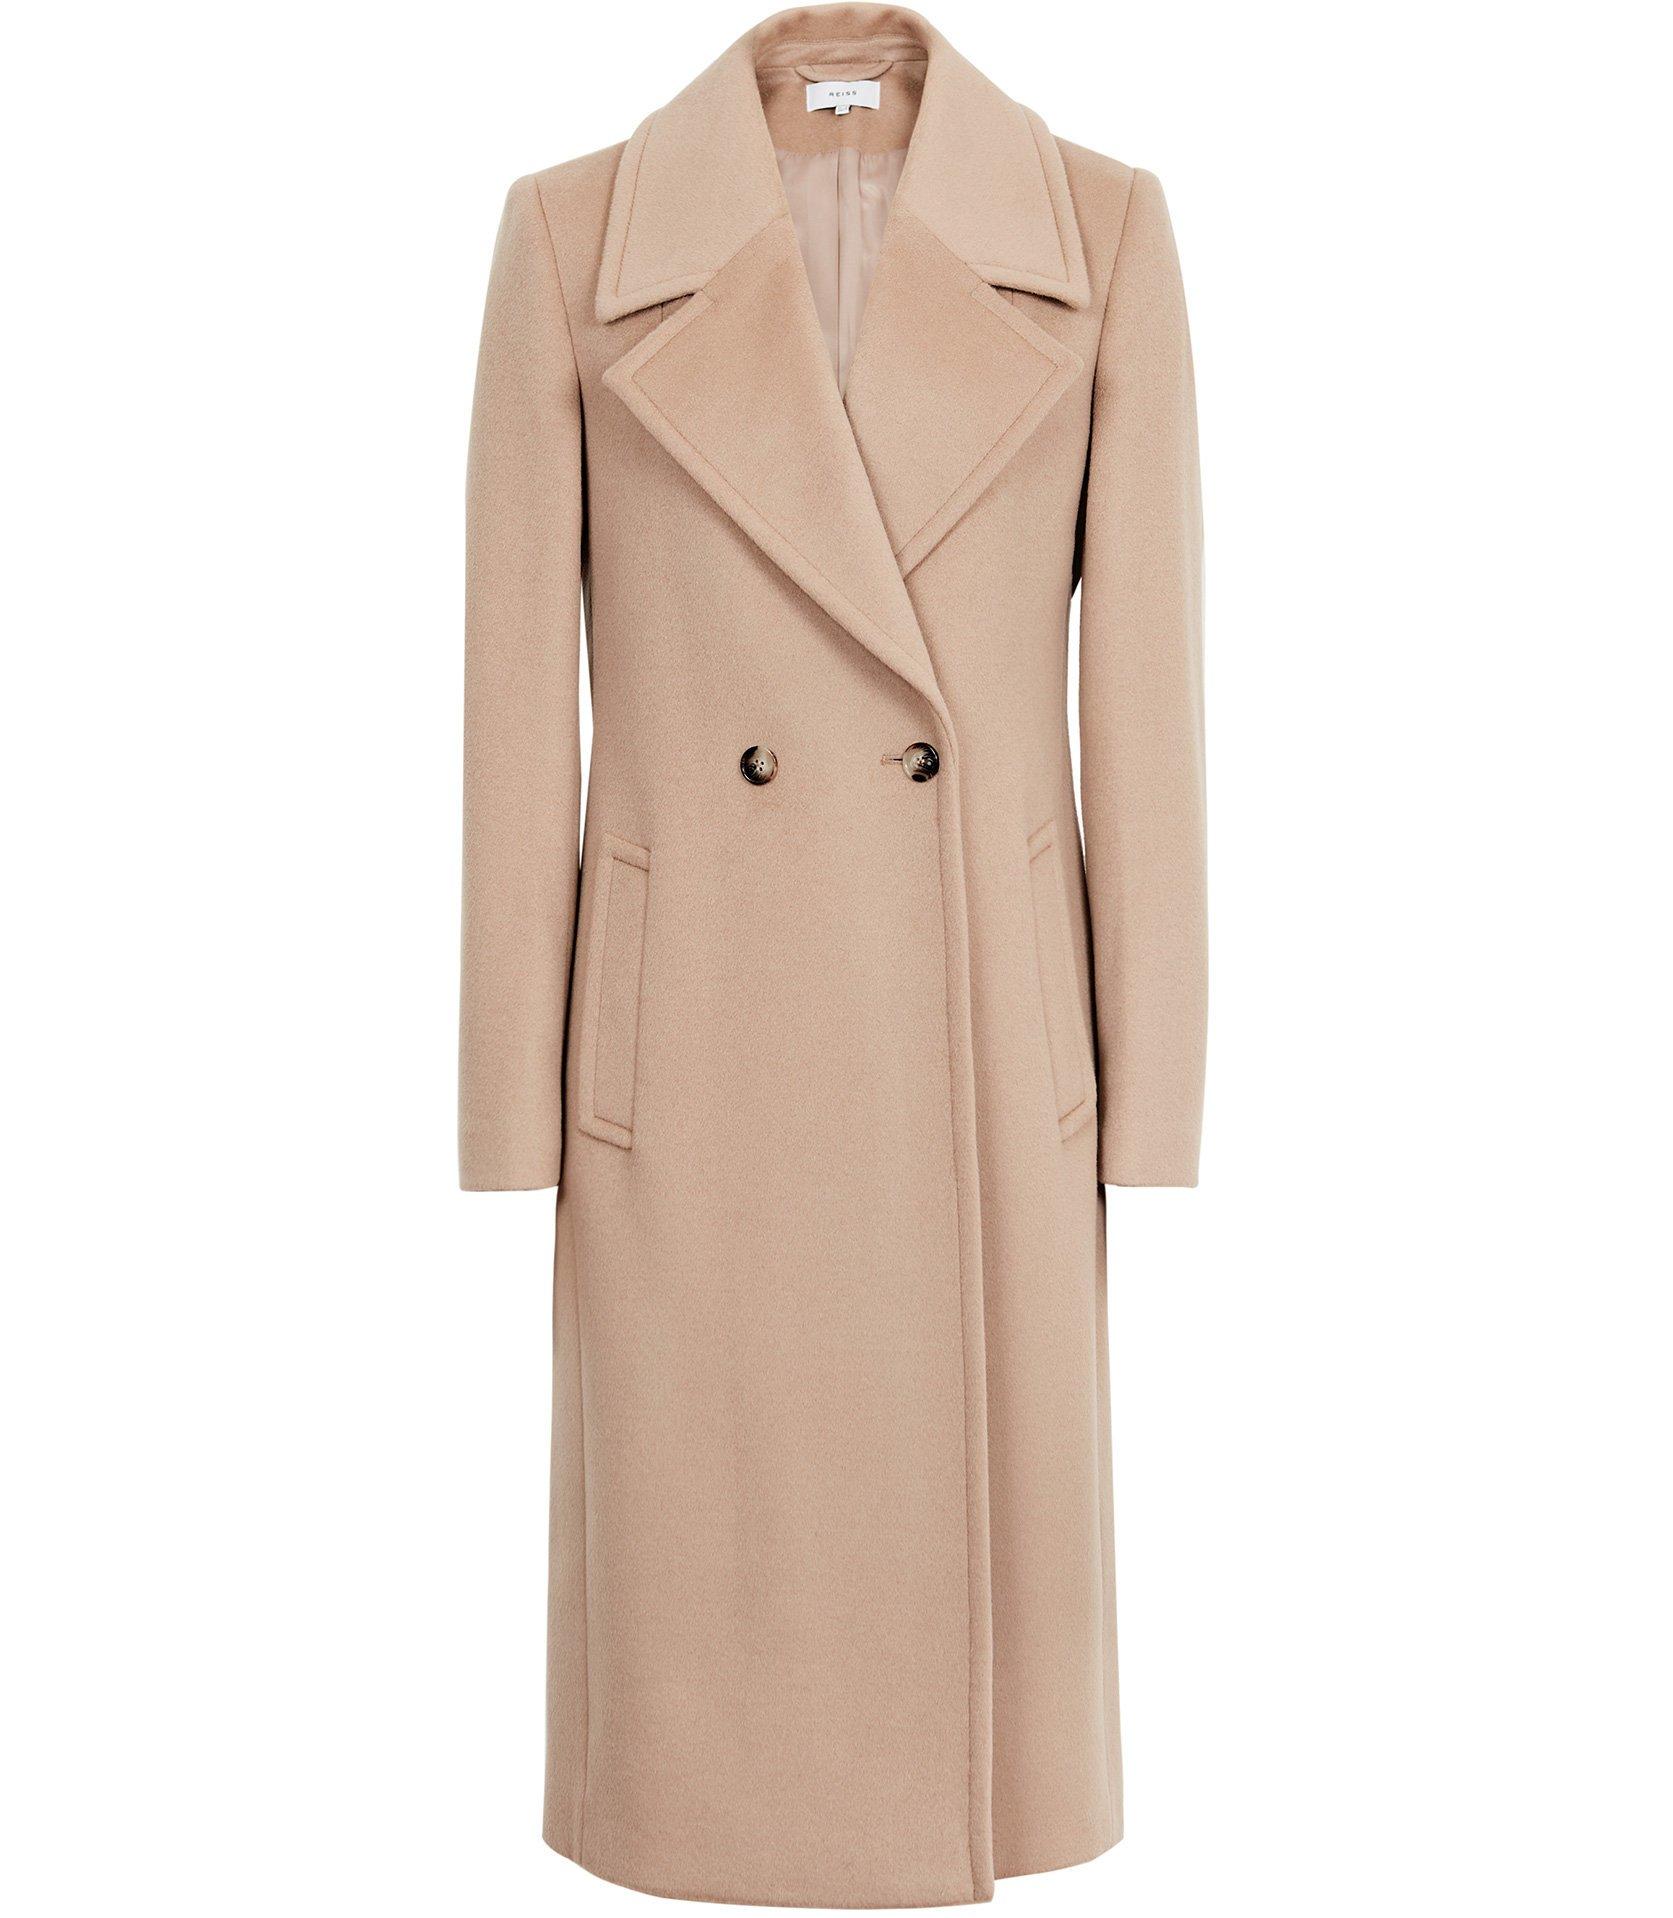 Reiss Lawson - Double-breasted Longline Coat in Camel (Natural) - Lyst